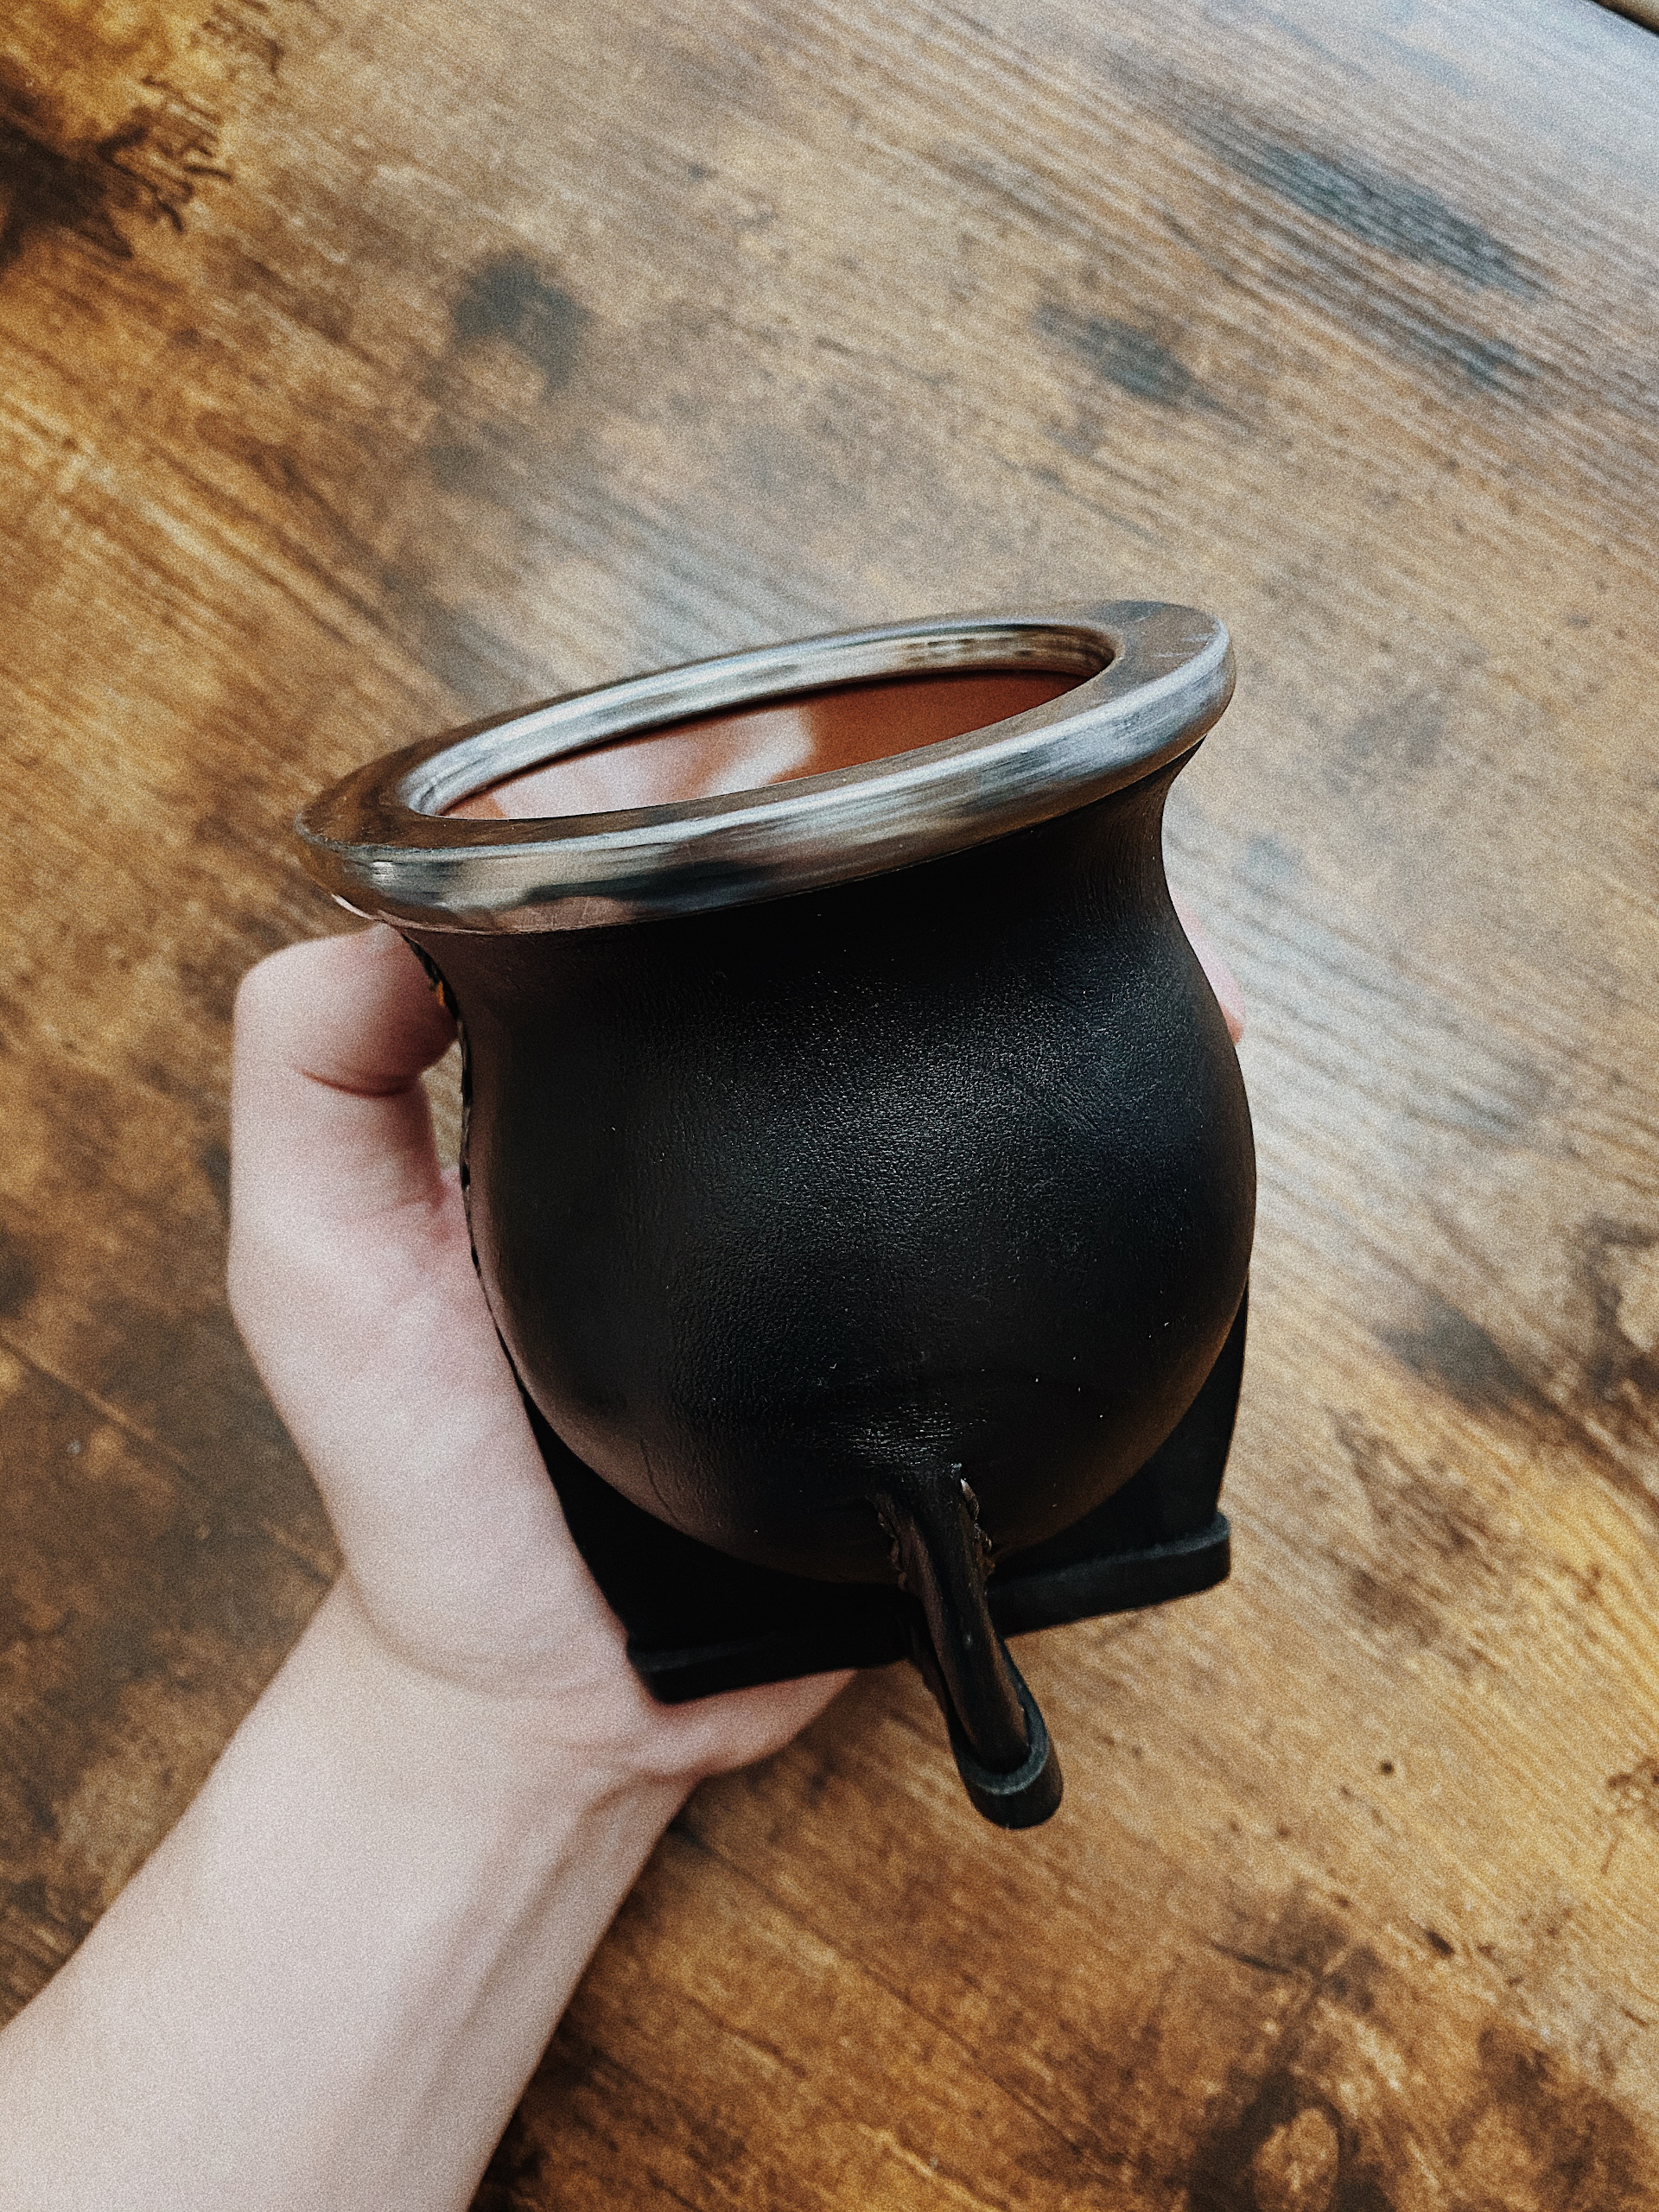 Mate Gourd , Leather , Mate Cup , Yerba Mate, Argentina Mate